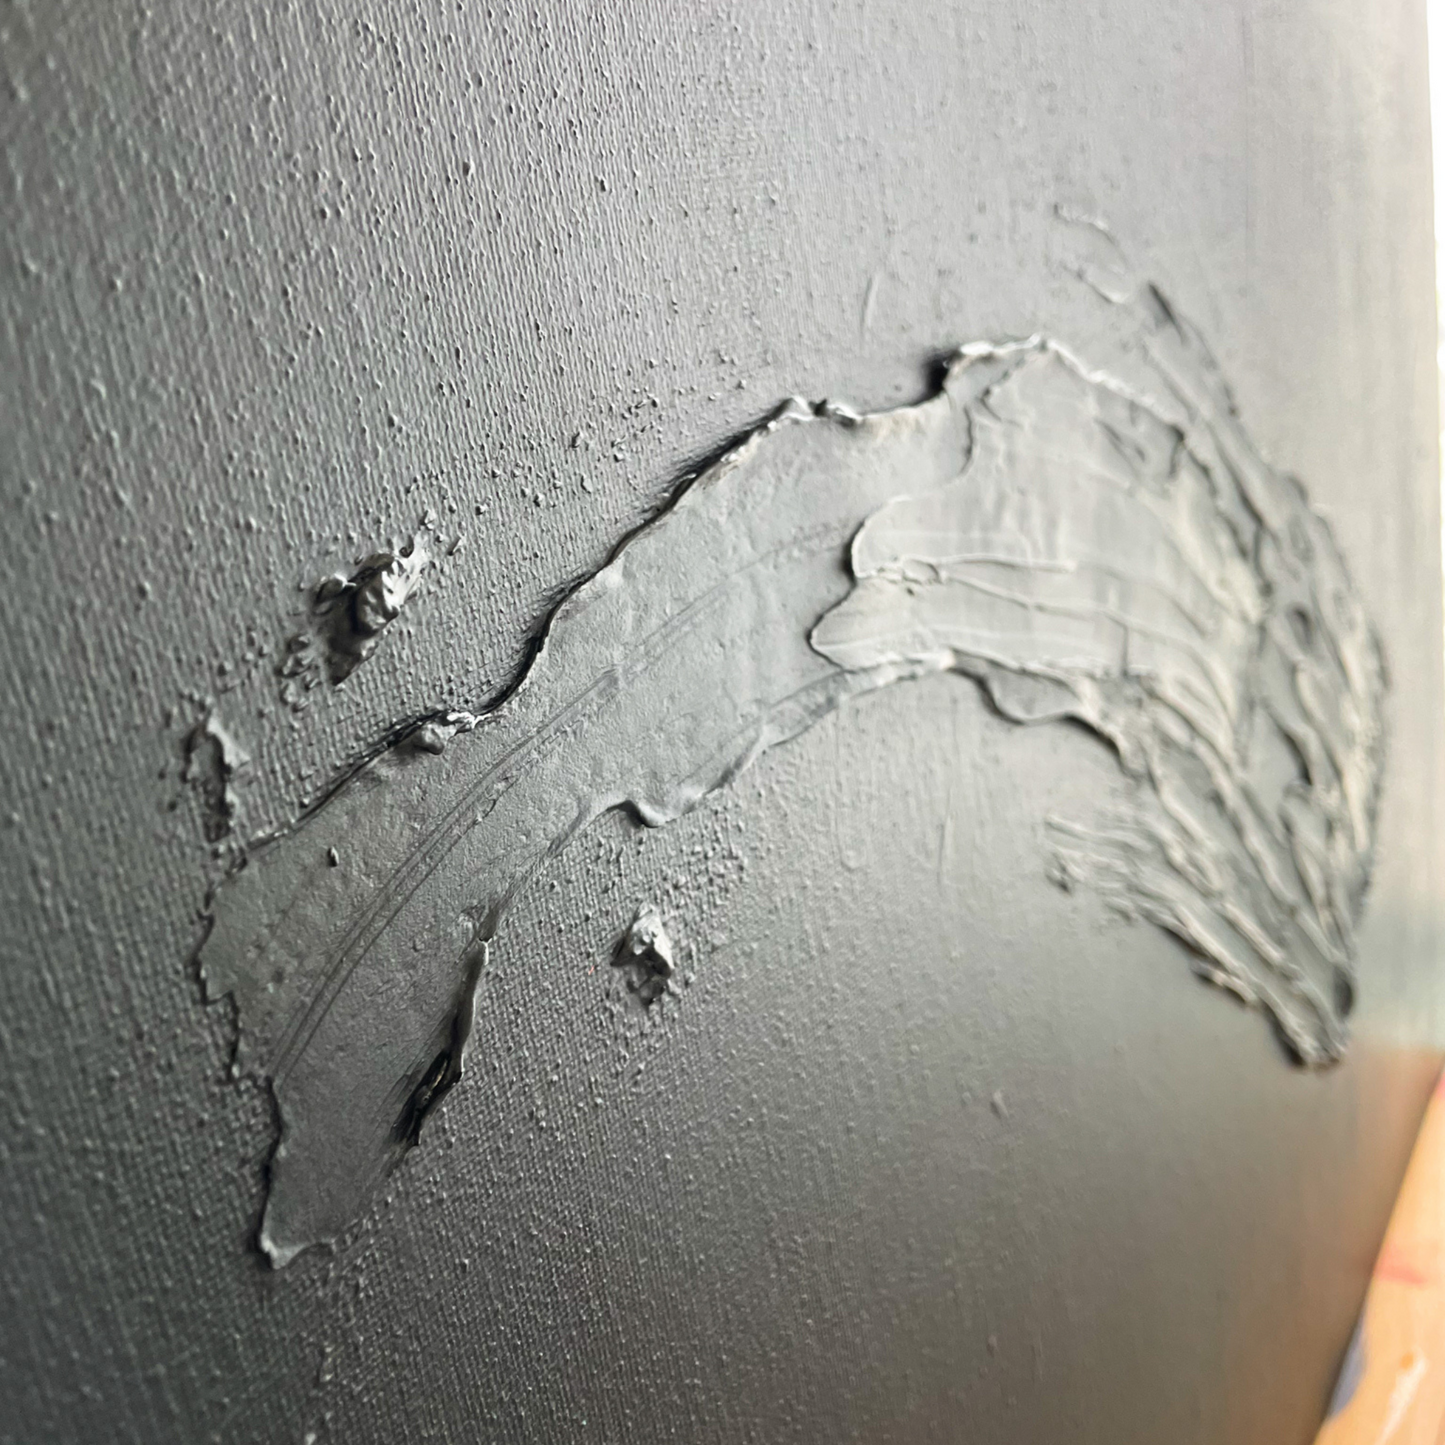 The side view of a black painting with a large textured downward swoosh.